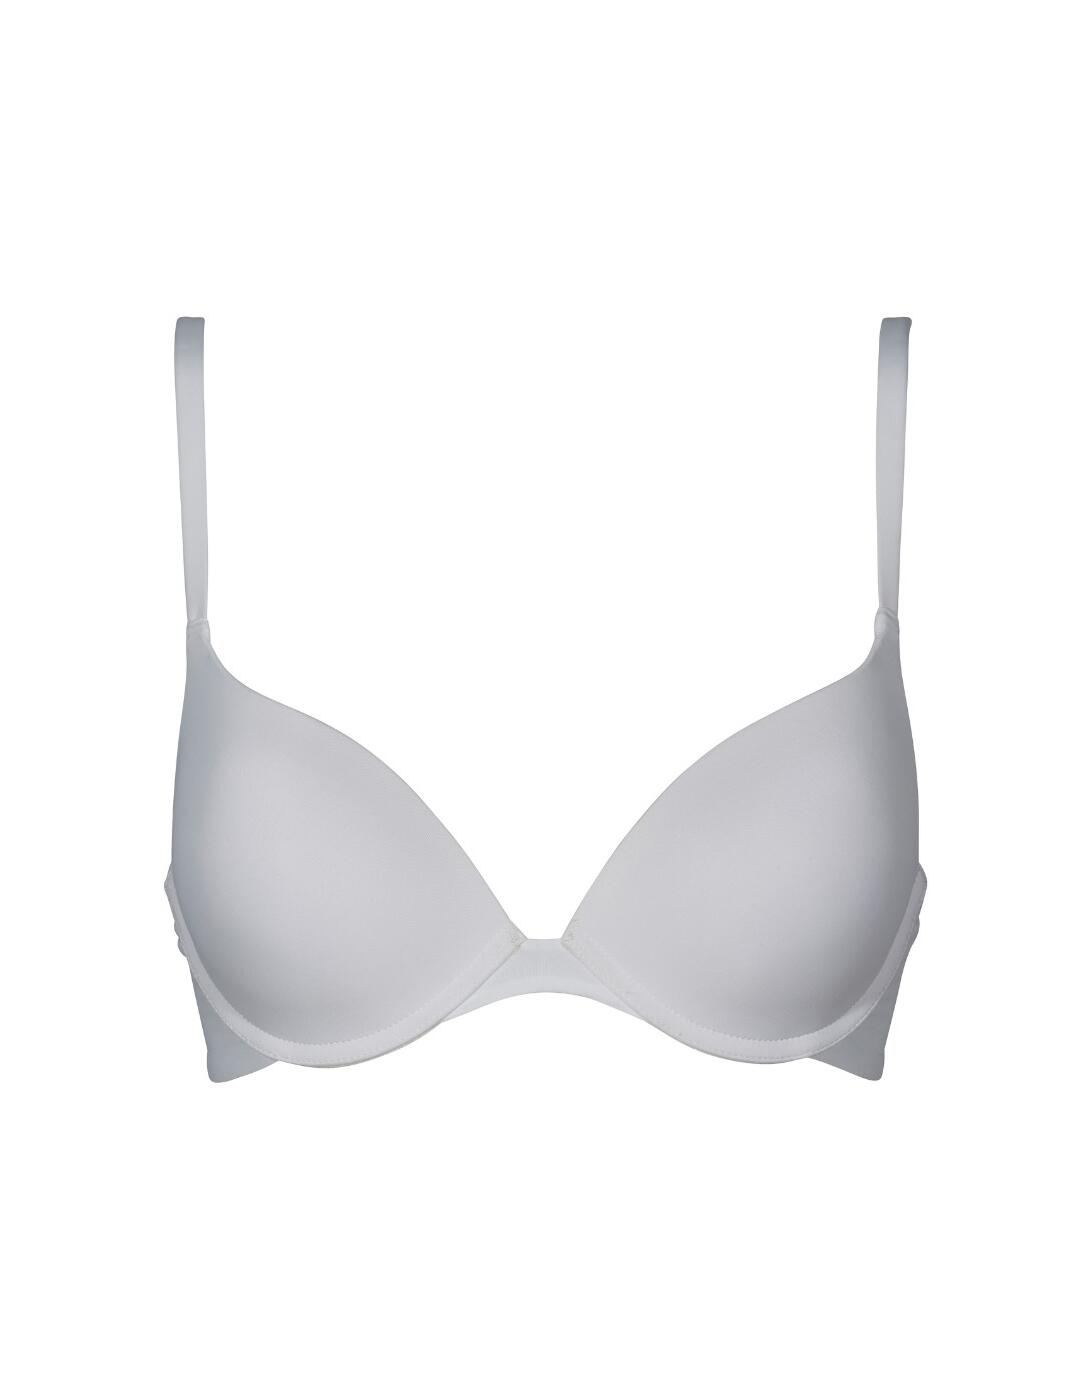 Order My Basic by After Eden Beauty White Padded Bra online.